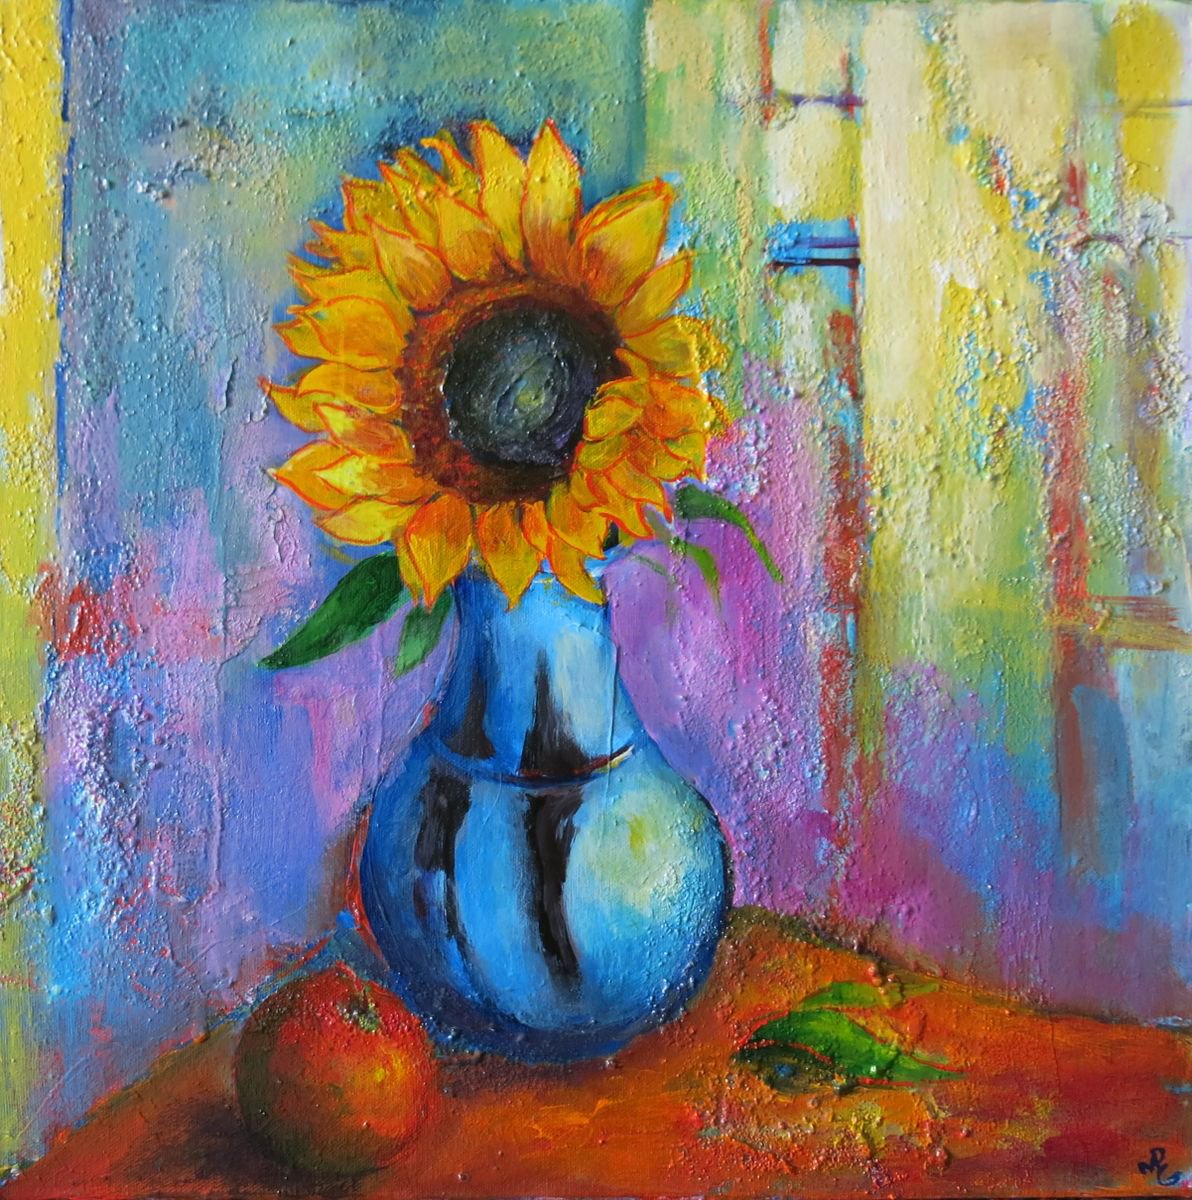 Sunflower and Blue Vase by Maureen Greenwood